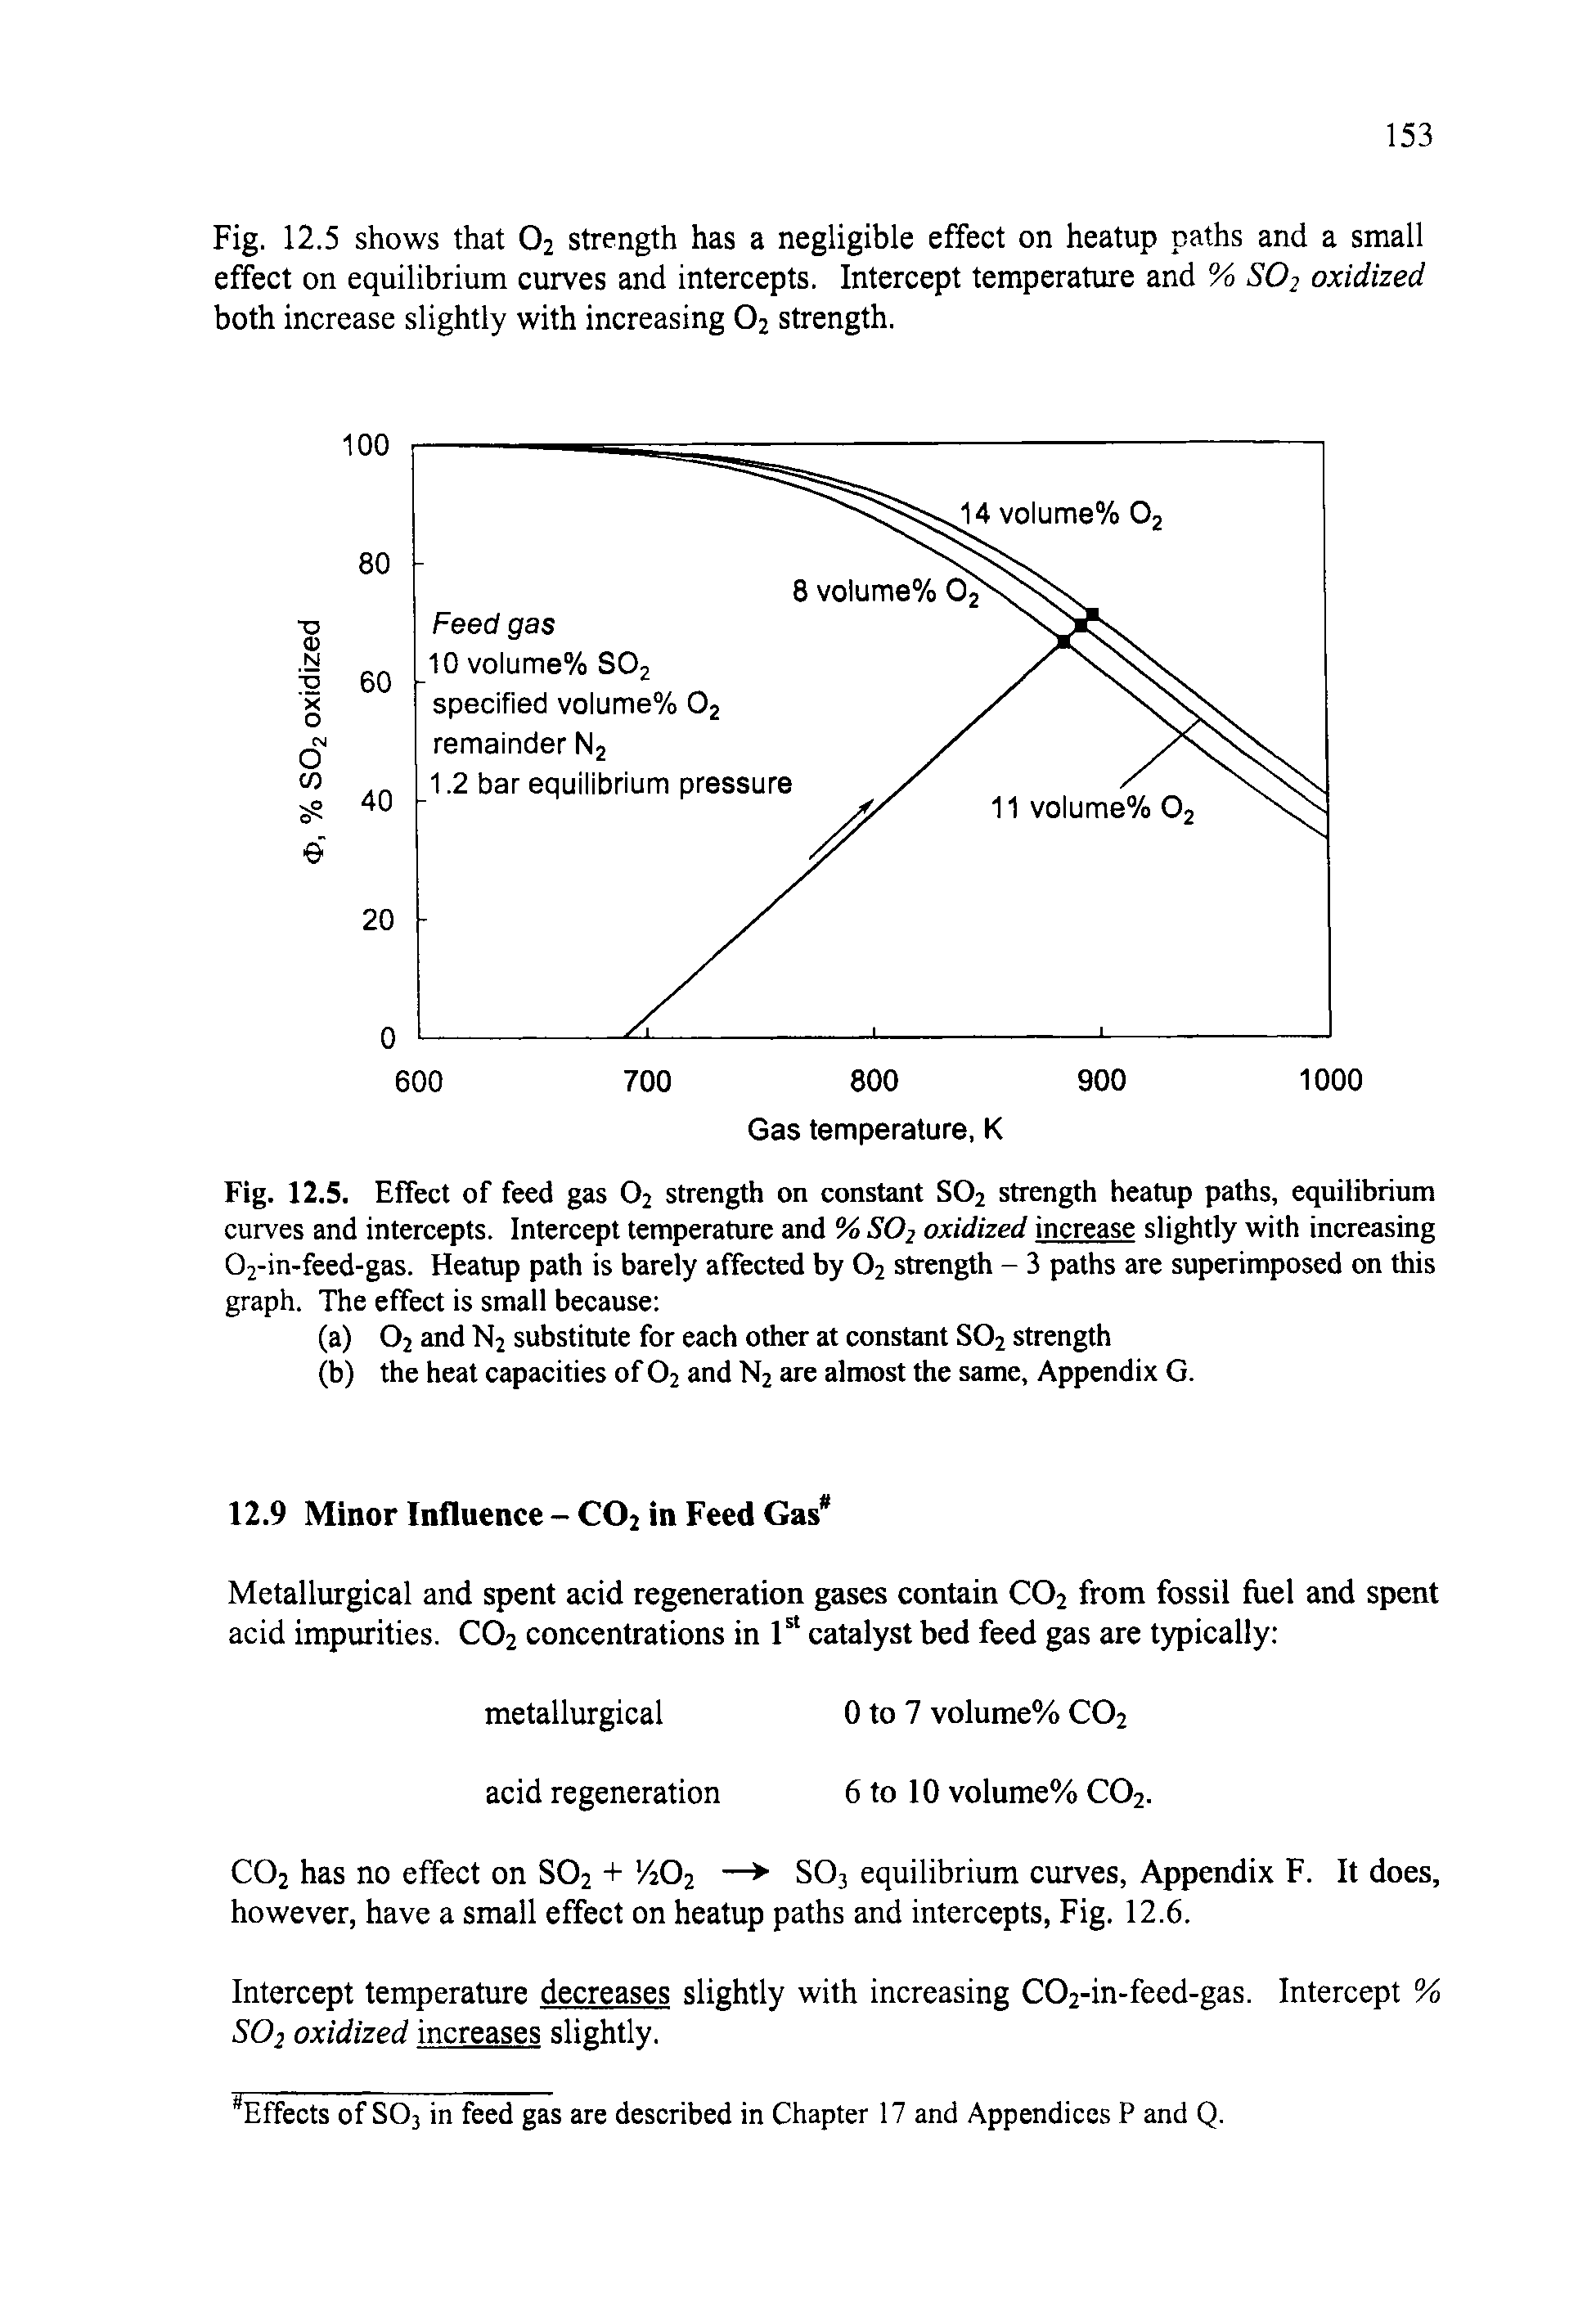 Fig. 12.5. Effect of feed gas 02 strength on constant S02 strength heatup paths, equilibrium curves and intercepts. Intercept temperature and % S02 oxidized increase slightly with increasing 02-in-feed-gas. Heatup path is barely affected by 02 strength - 3 paths are superimposed on this graph. The effect is small because ...